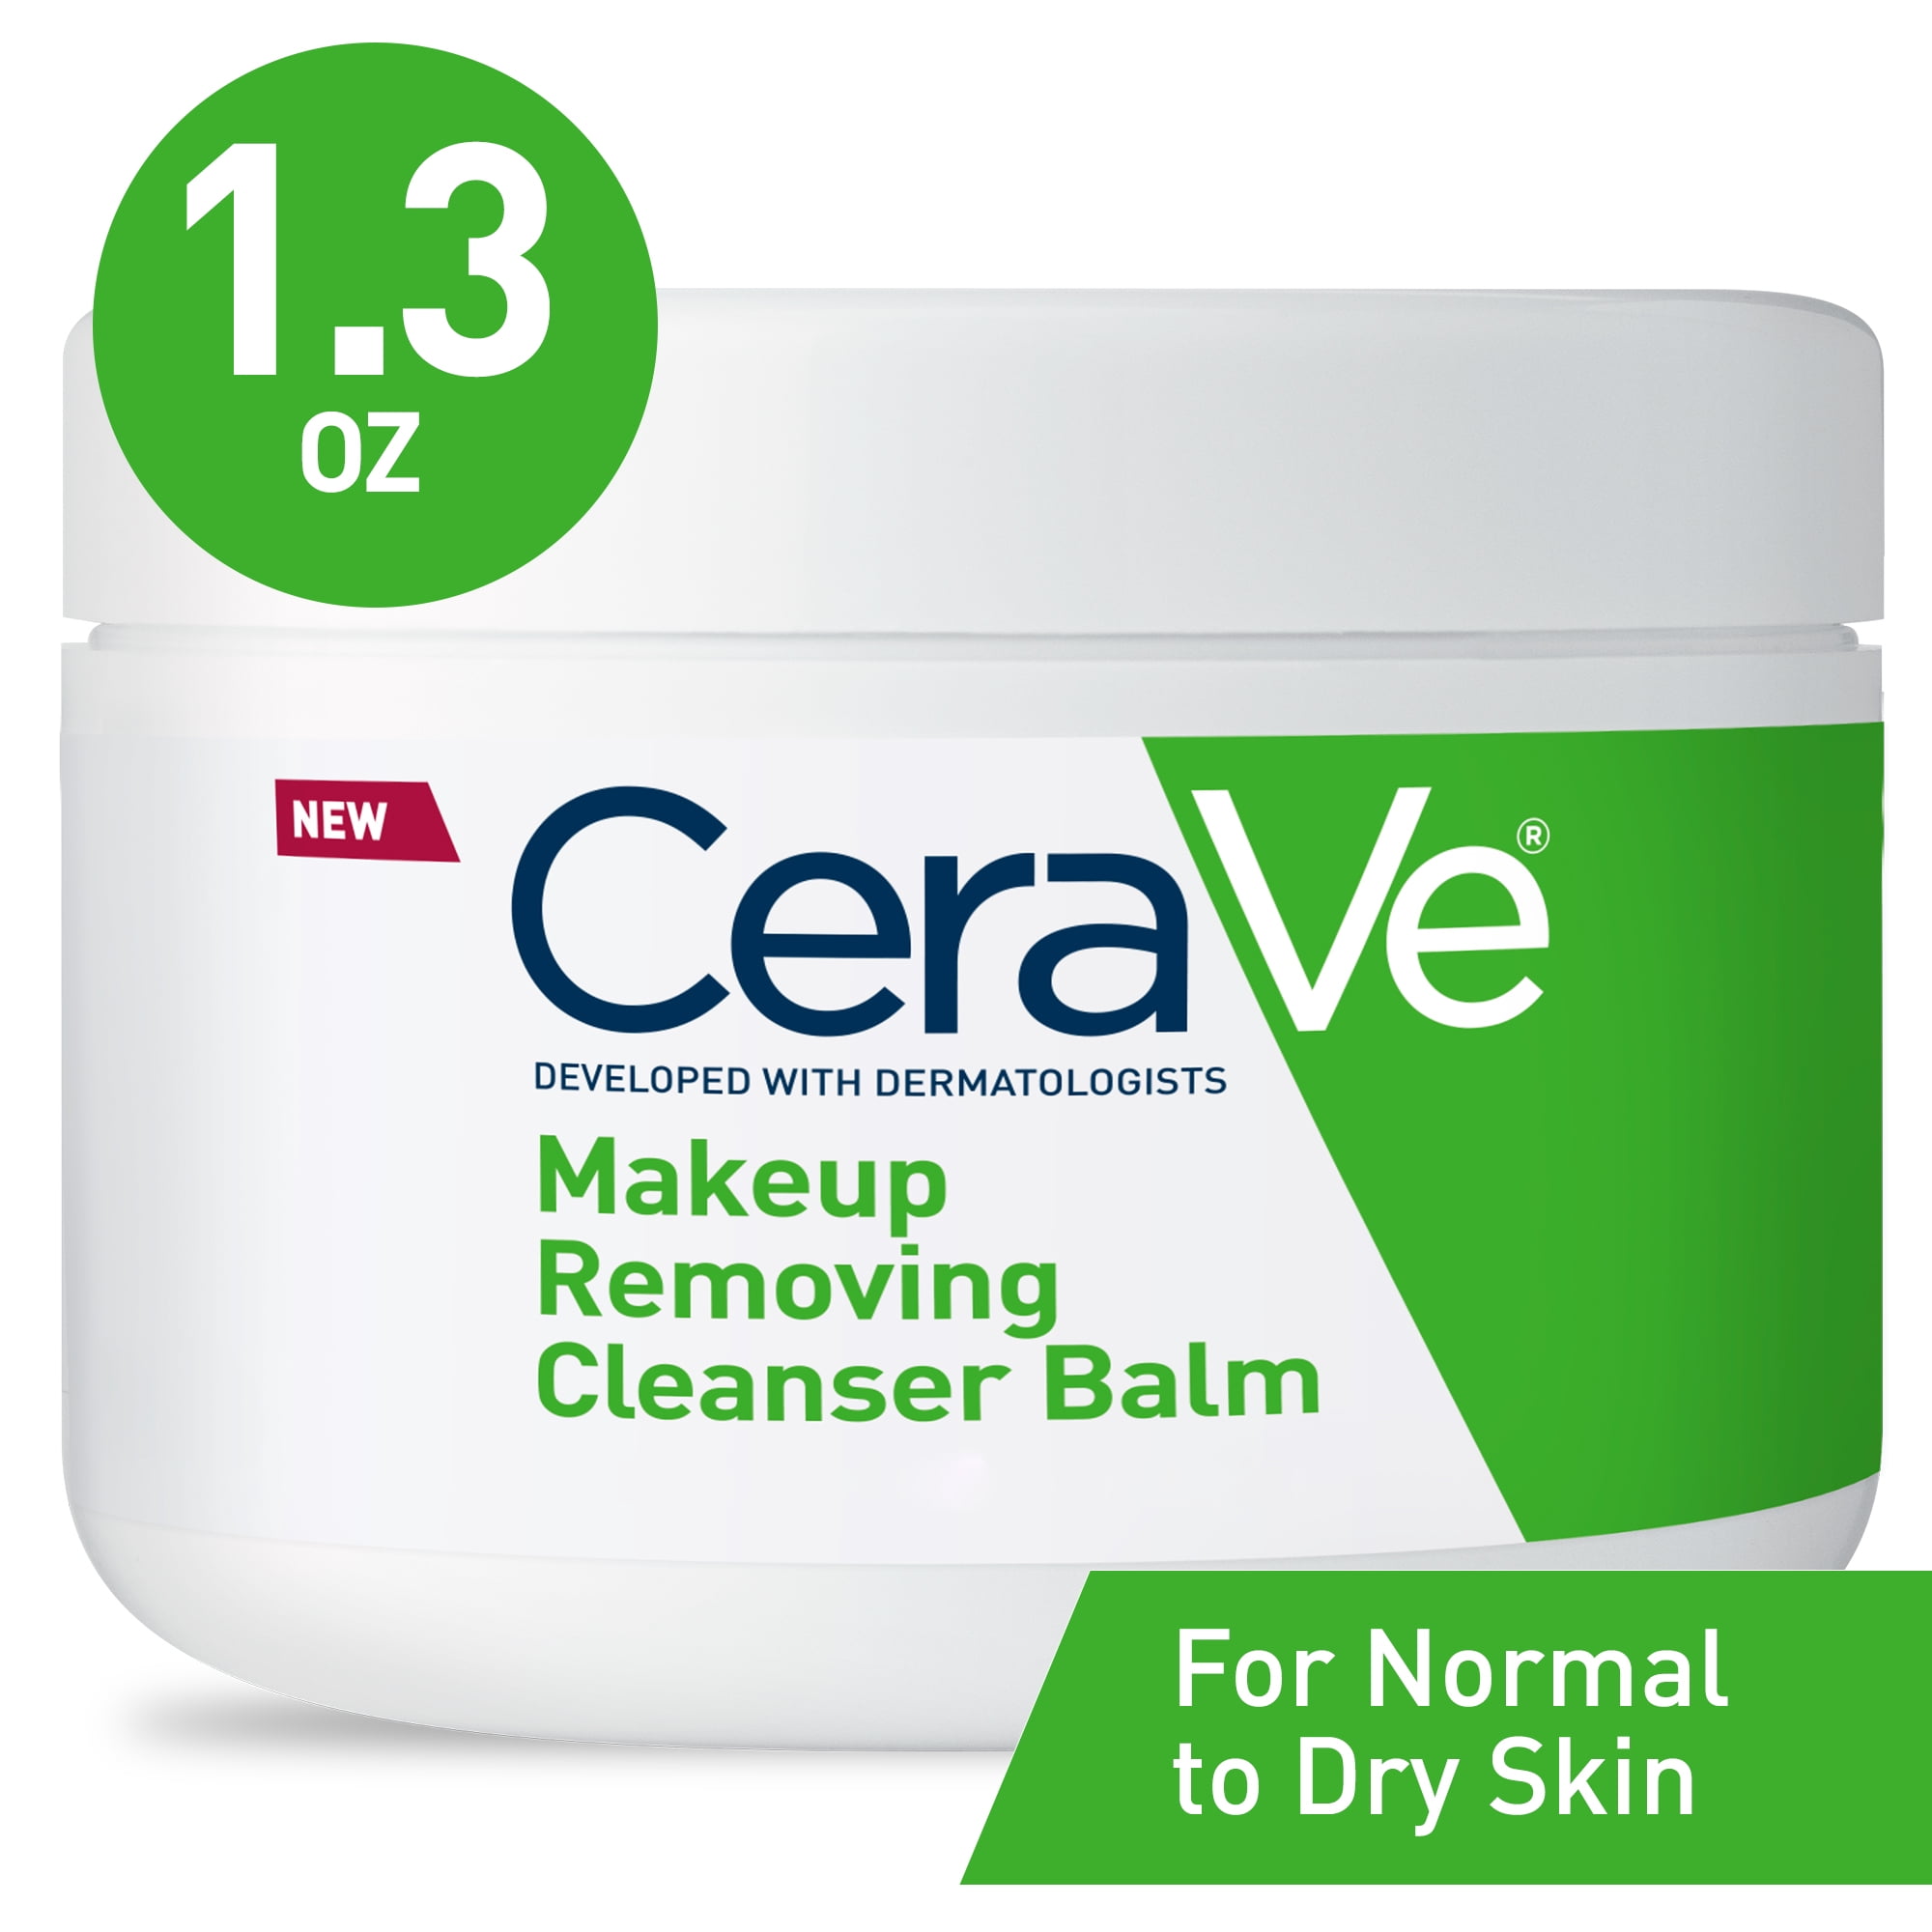 Cerave Hydrating Cleansing Balm, Face Makeup Remover with Ceramides and Plant-based Jojoba Oil, 1.3 oz